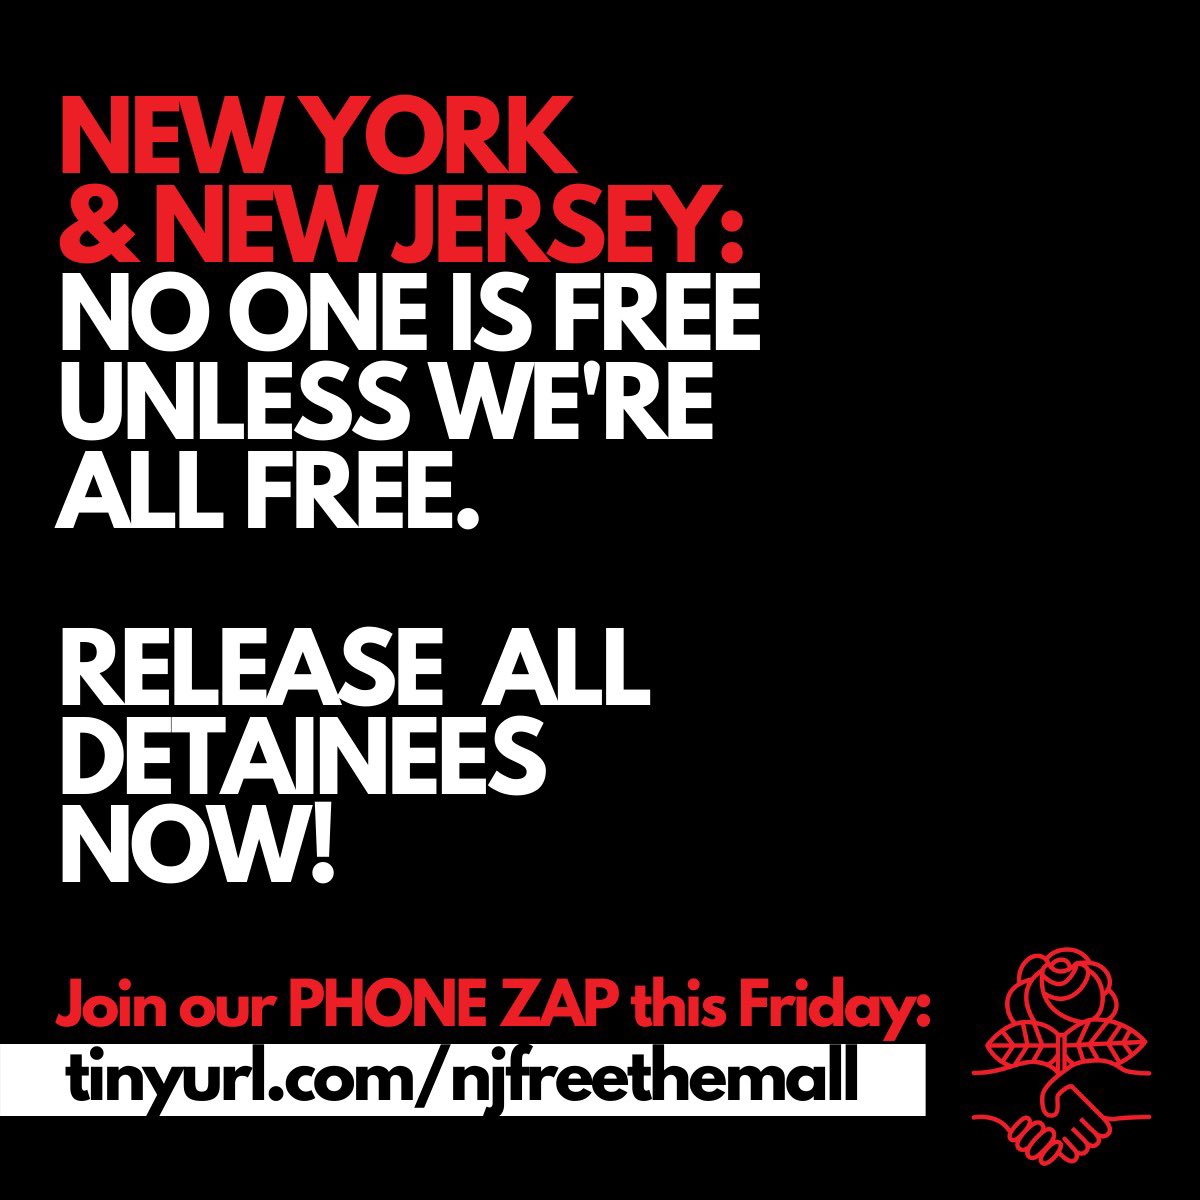 🚨🚨Join our comrades at @ICEfreeNJ @NorthNJDSA @nycDSA @NeverAgainActn  for a coordinated phone zap at 12:30 to #FreeThemAll! 🚨🚨

Who are we targeting? Hudson, Bergen, +Essex Co. Executives and Freeholders, Bergen County Sheriff, and others! actionnetwork.org/events/freethe…